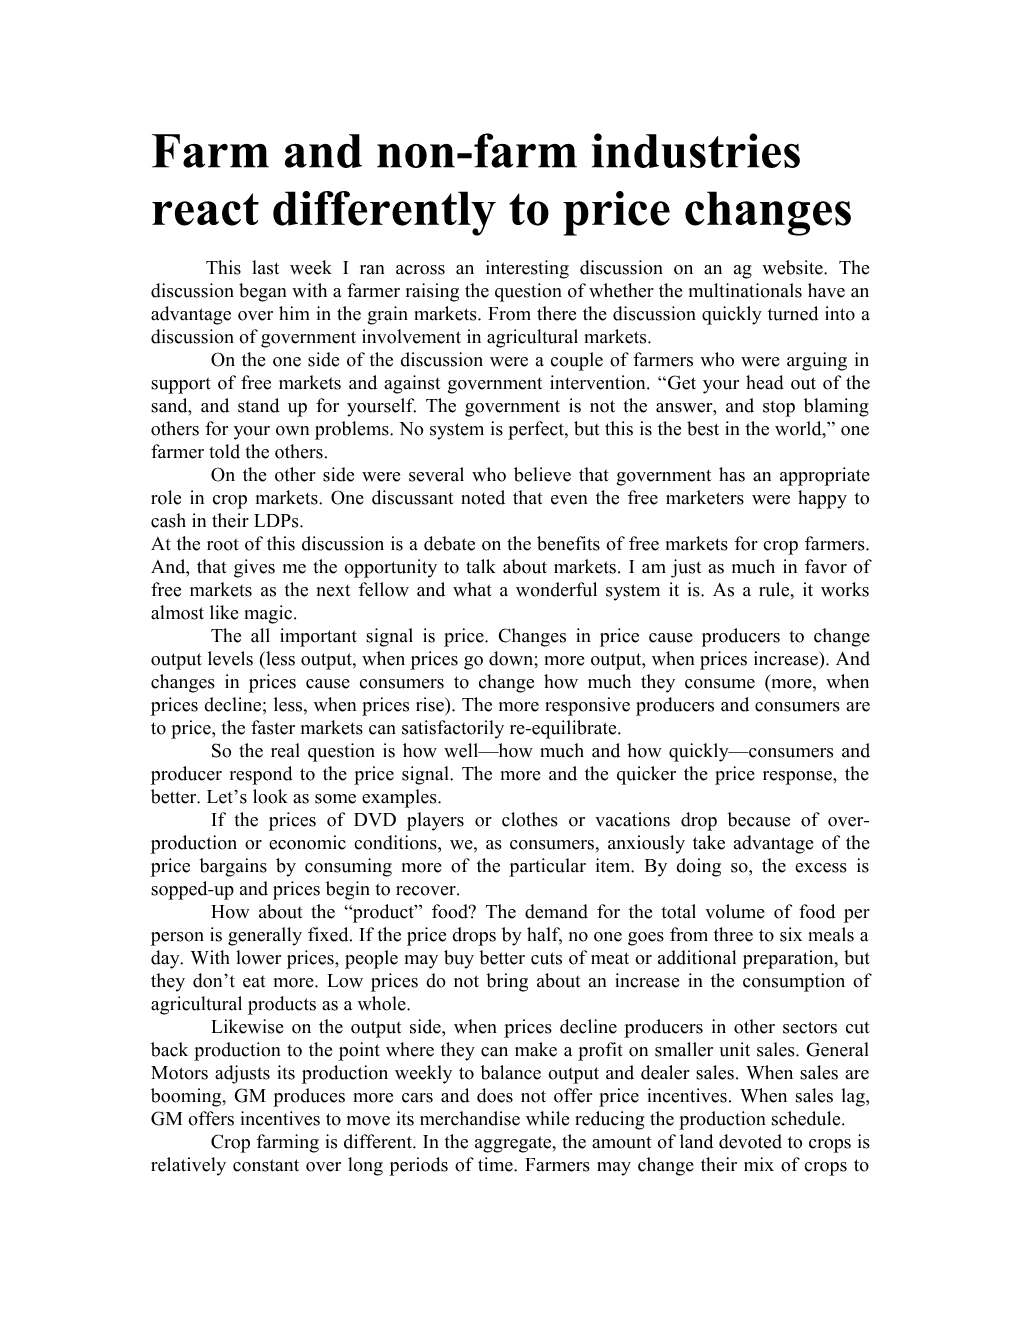 Farm and Non-Farm Industries React Differently to Price Changes